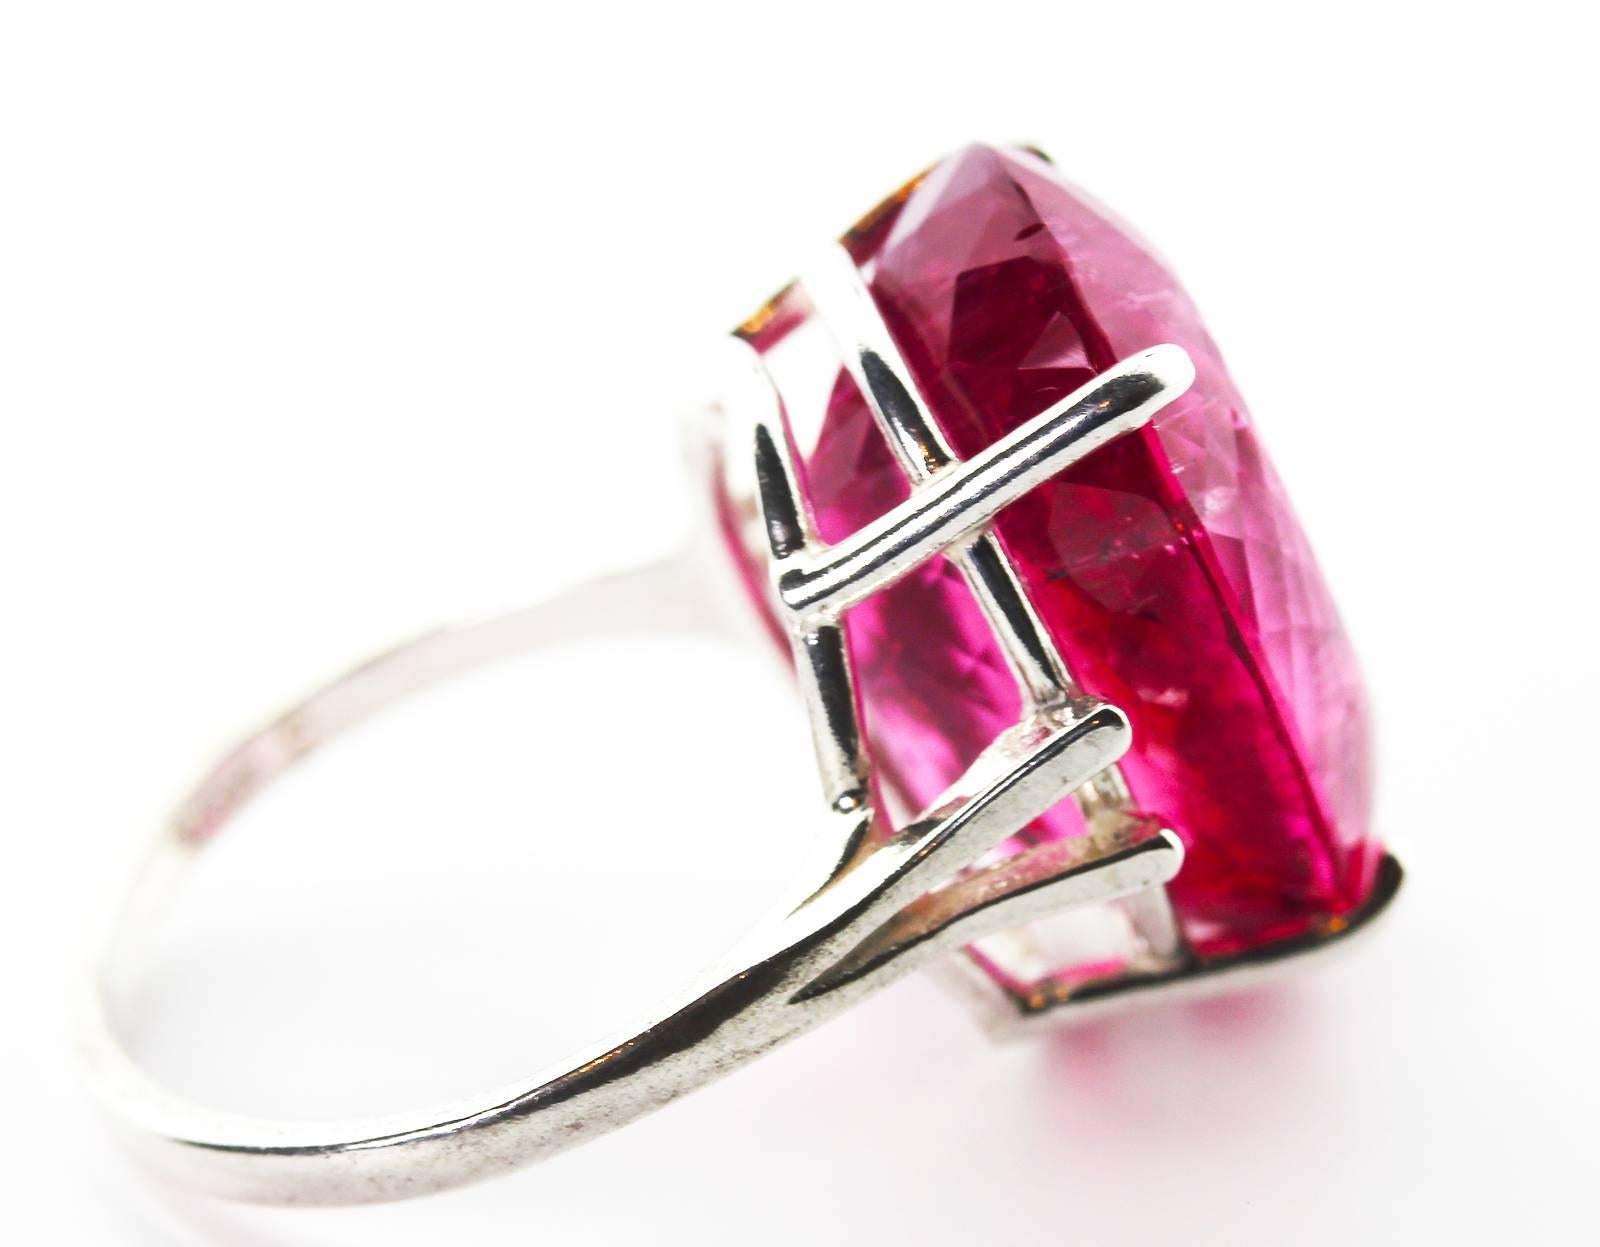 This flawless looking spectacular glittering rare 19.59 Carat oval Rubelite from the famous mine near Ouro Preto in Brasil measures 19.7 mm x 14.2 mm and is set in a Sterling Silver ring size 6.75 (easily sizable).